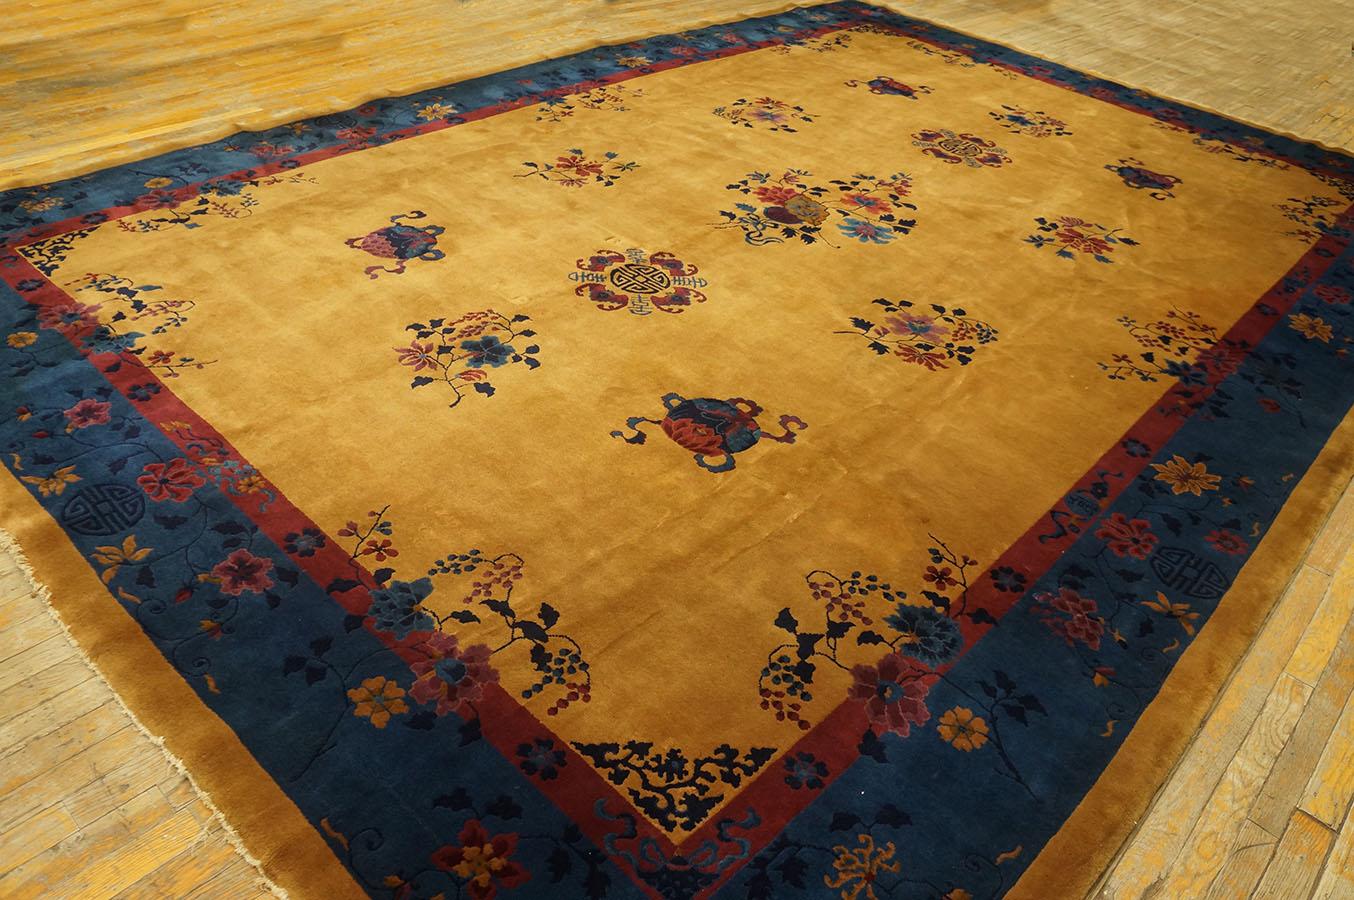 Hand-Knotted 1920s Chinese Art Deco Carpet ( 10' x 14'6